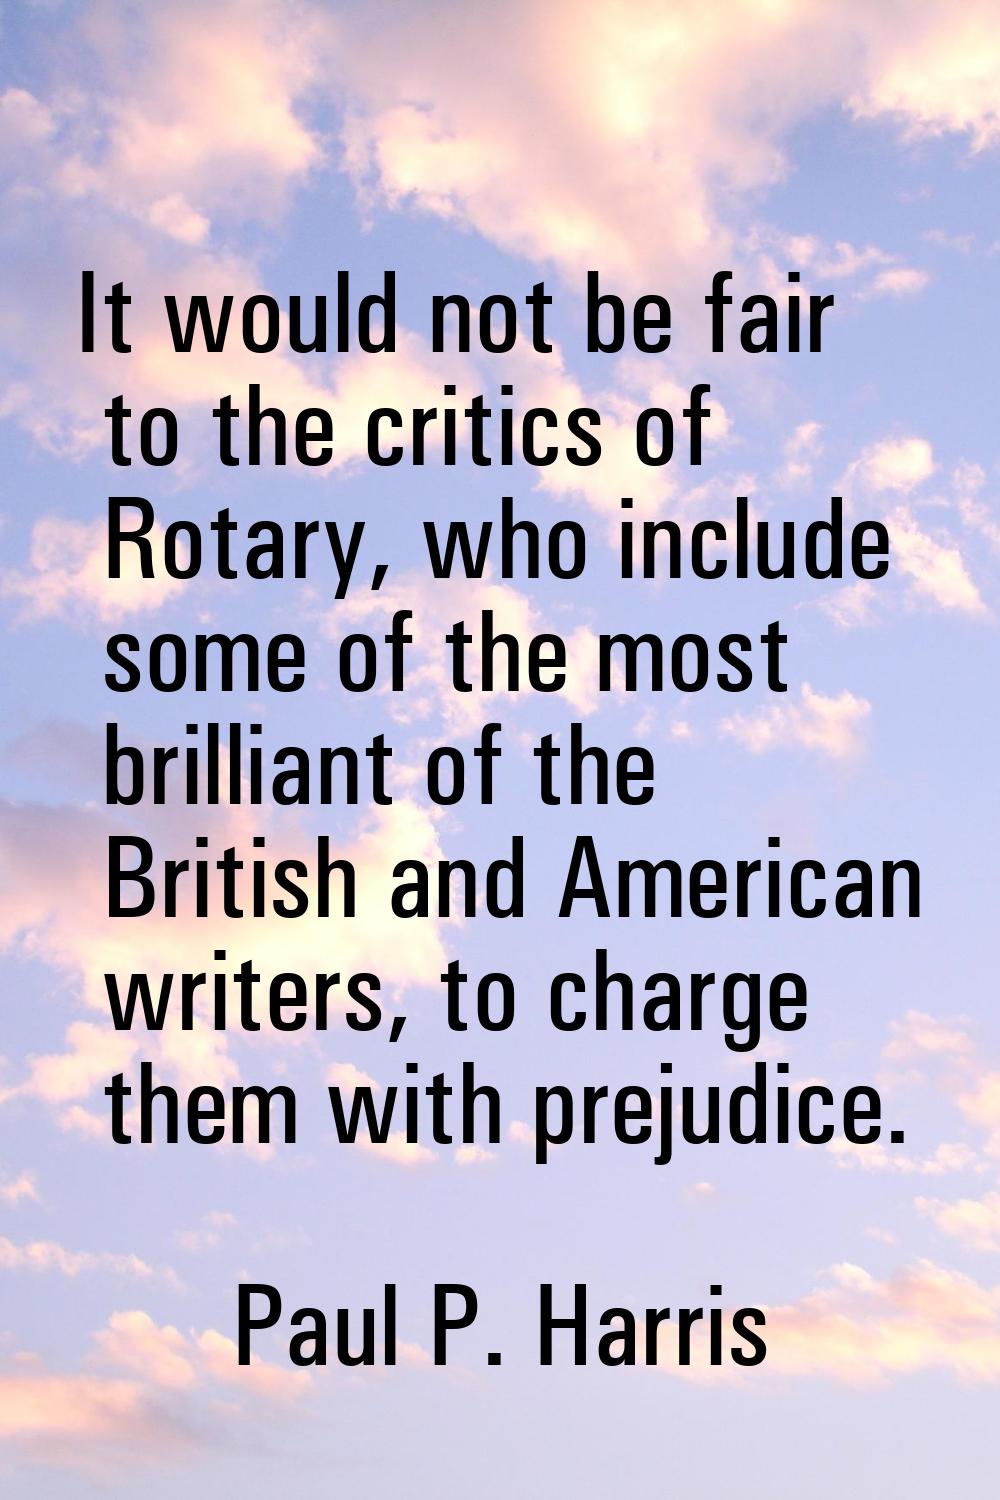 It would not be fair to the critics of Rotary, who include some of the most brilliant of the Britis